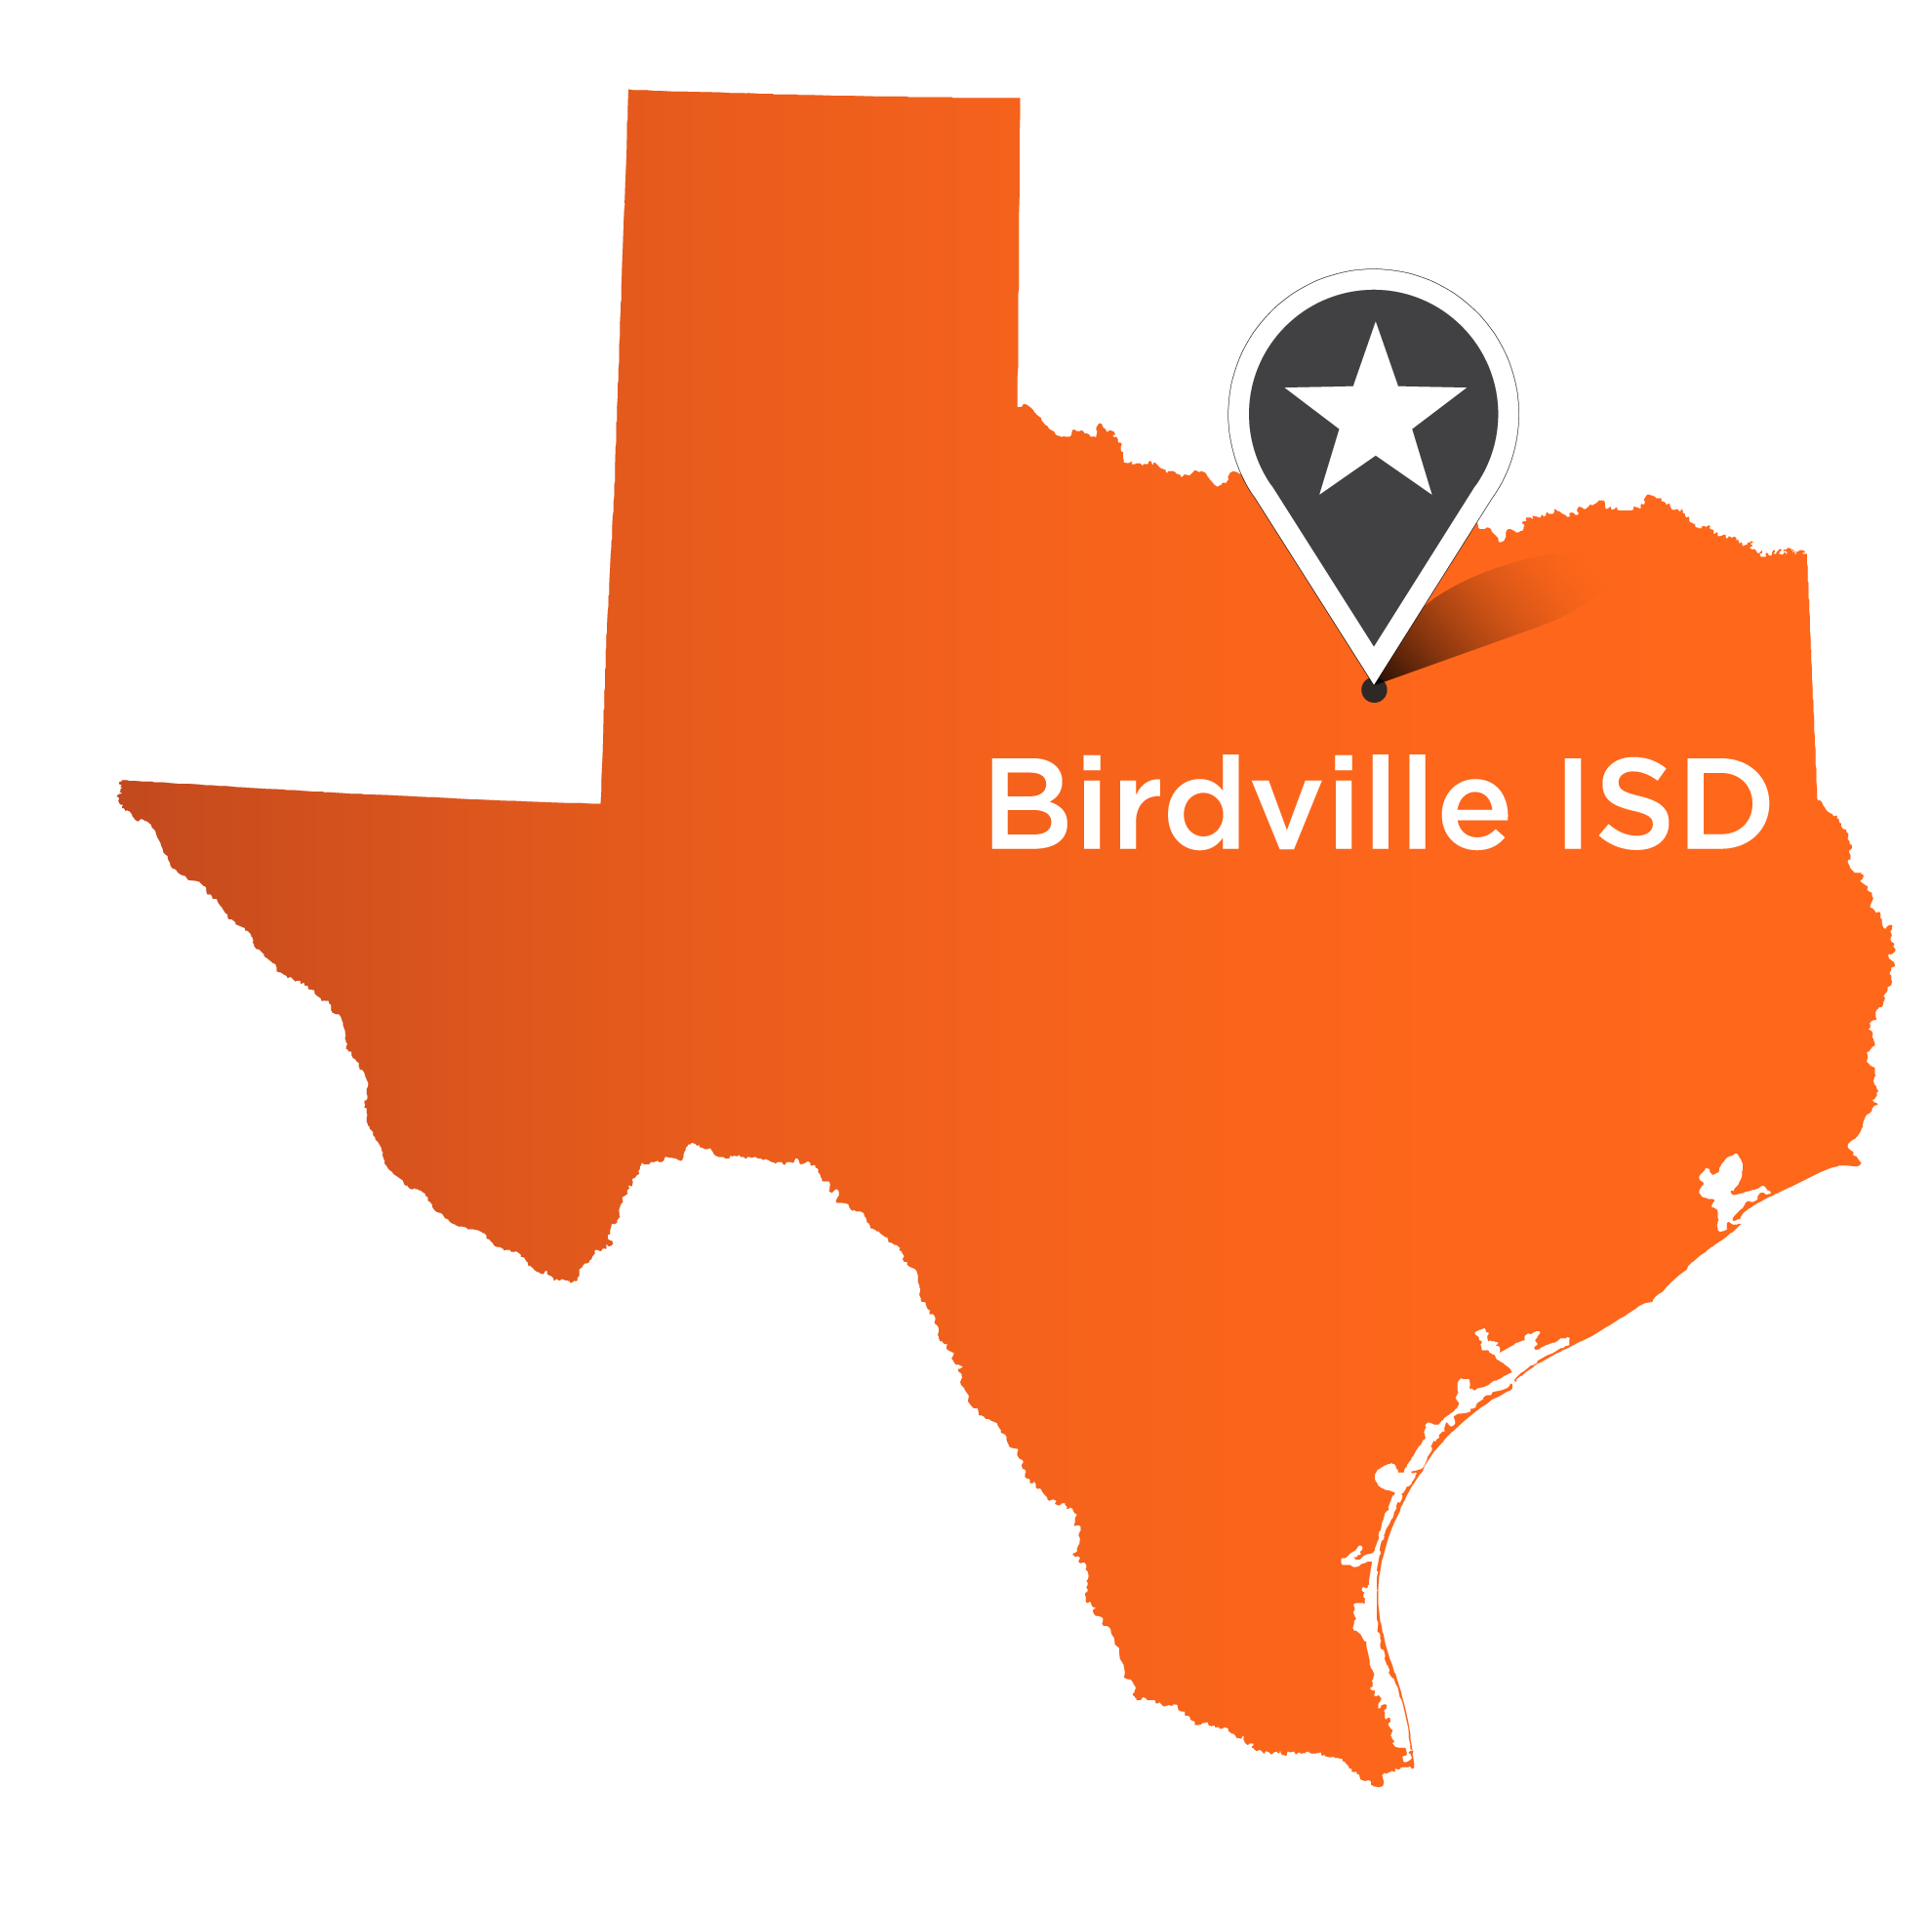 How many schools are in the Birdville ISD?